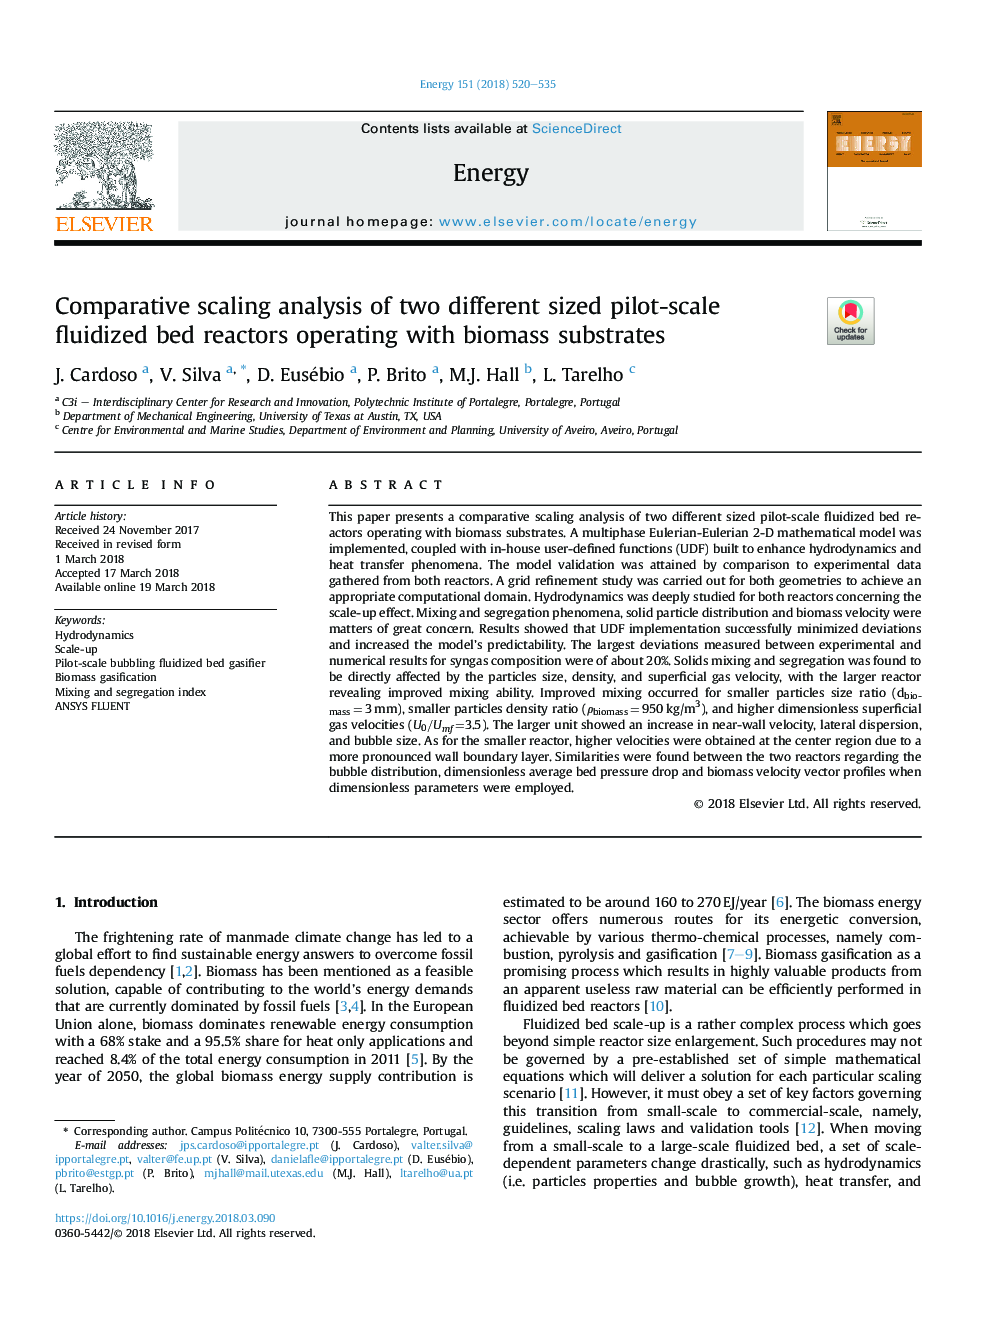 Comparative scaling analysis of two different sized pilot-scale fluidized bed reactors operating with biomass substrates